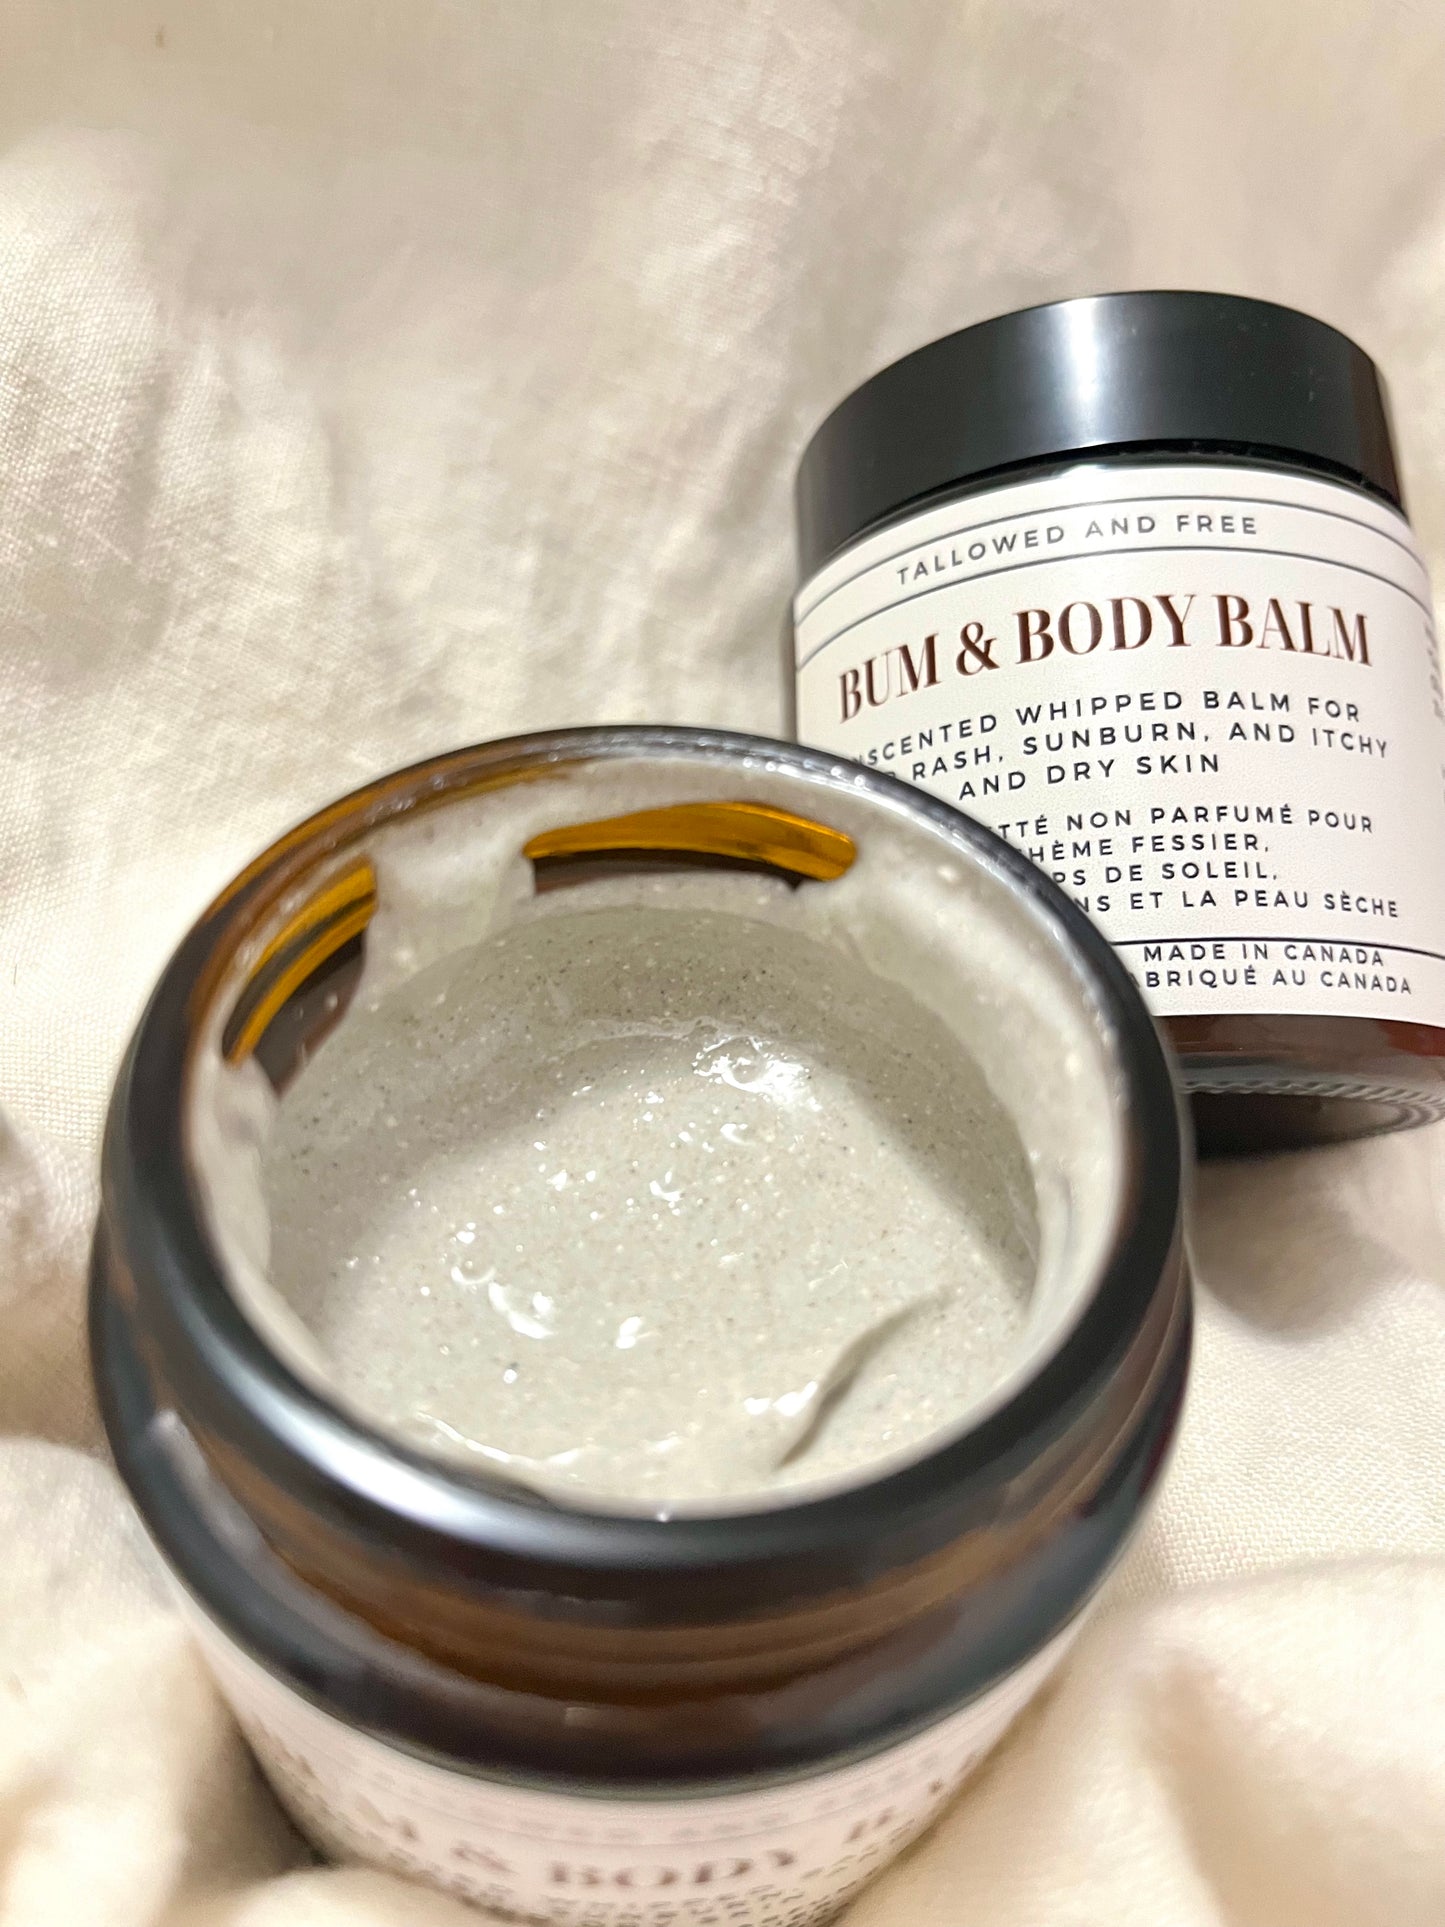 New: Bum & Body Balm - 75 ml - With Calendula-infused Olive Oil, Zinc, and Bentonite Clay. For Diaper Rash, Sunburn, and Itchy and Dry Skin.